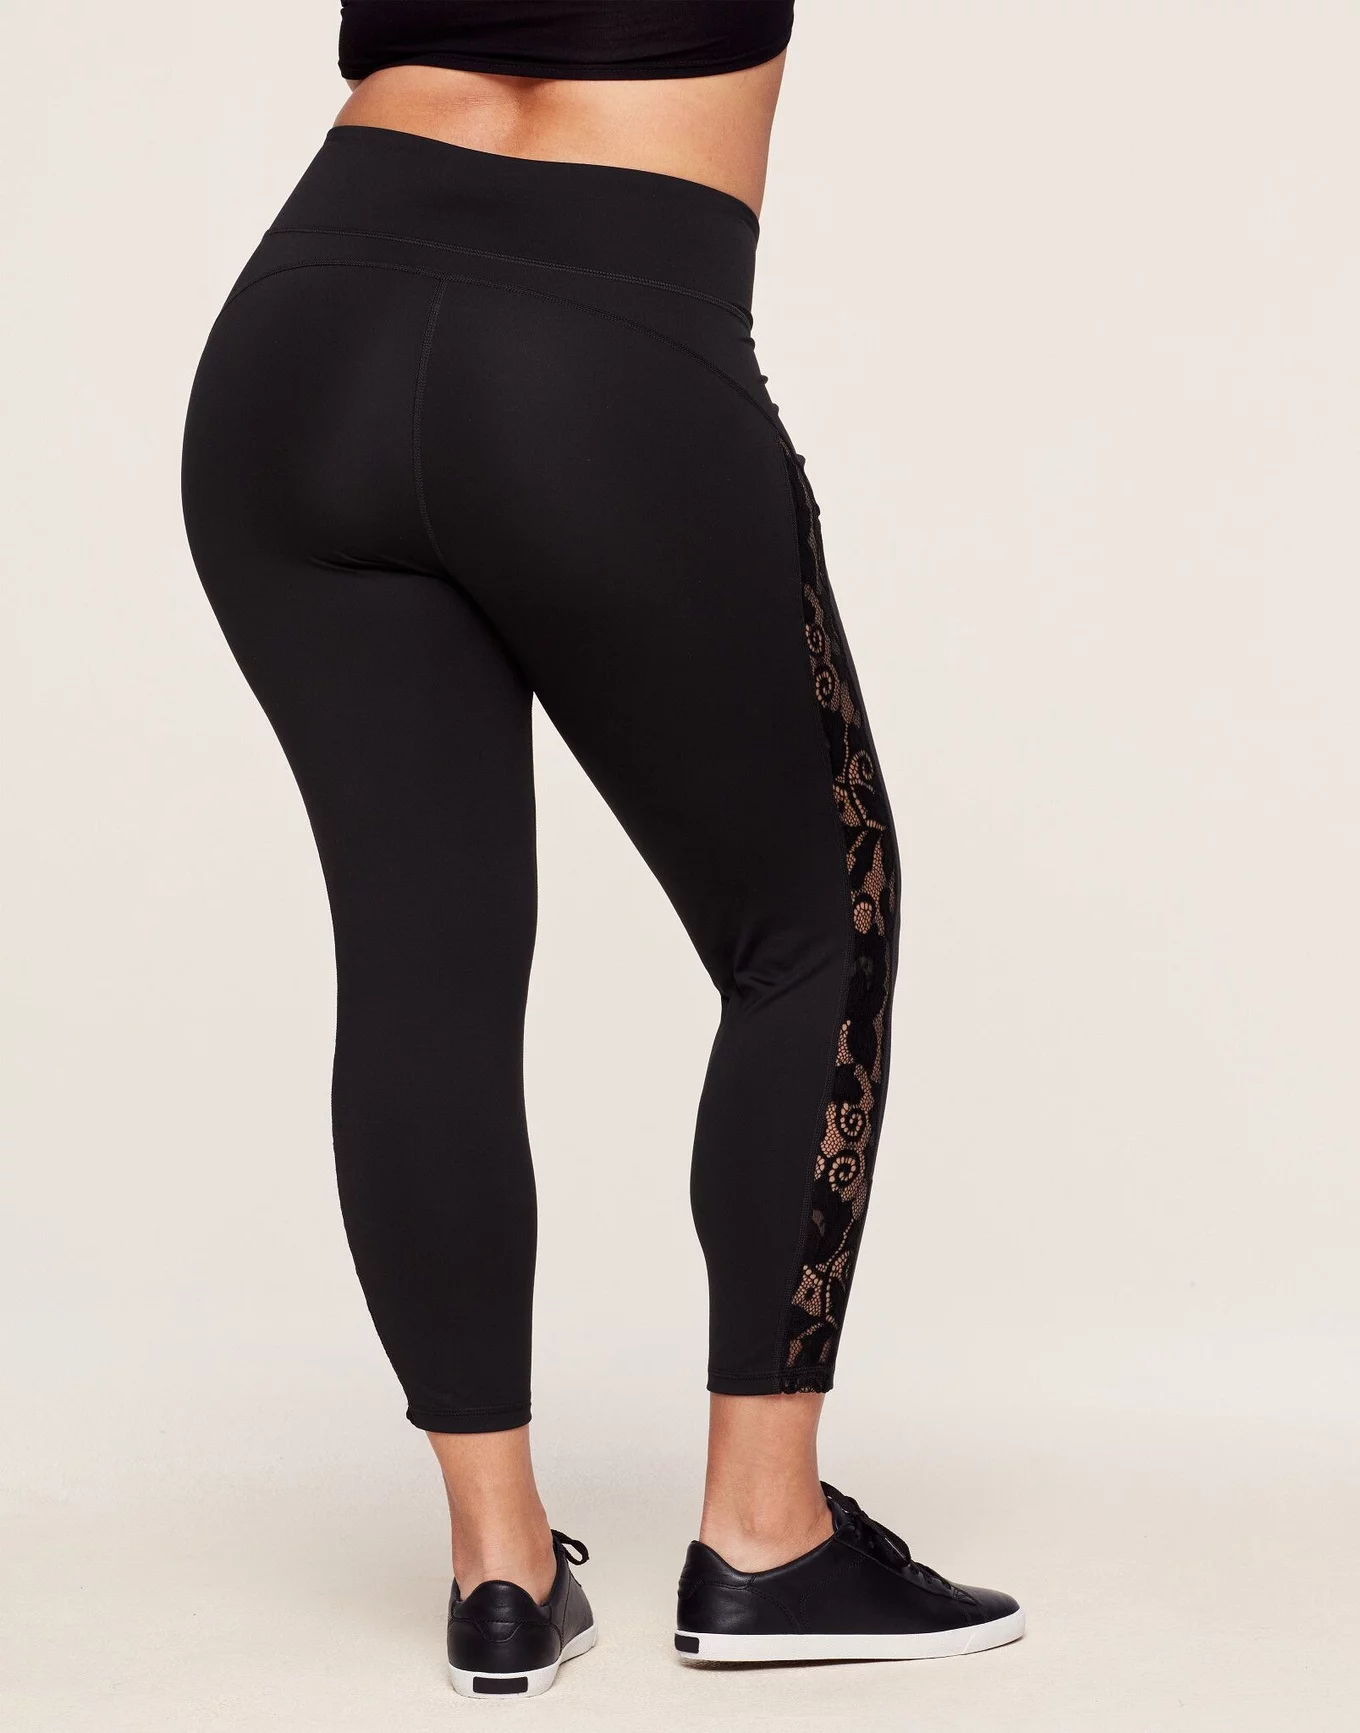 Blue Life Fit Cheeky Lace Up Leggings